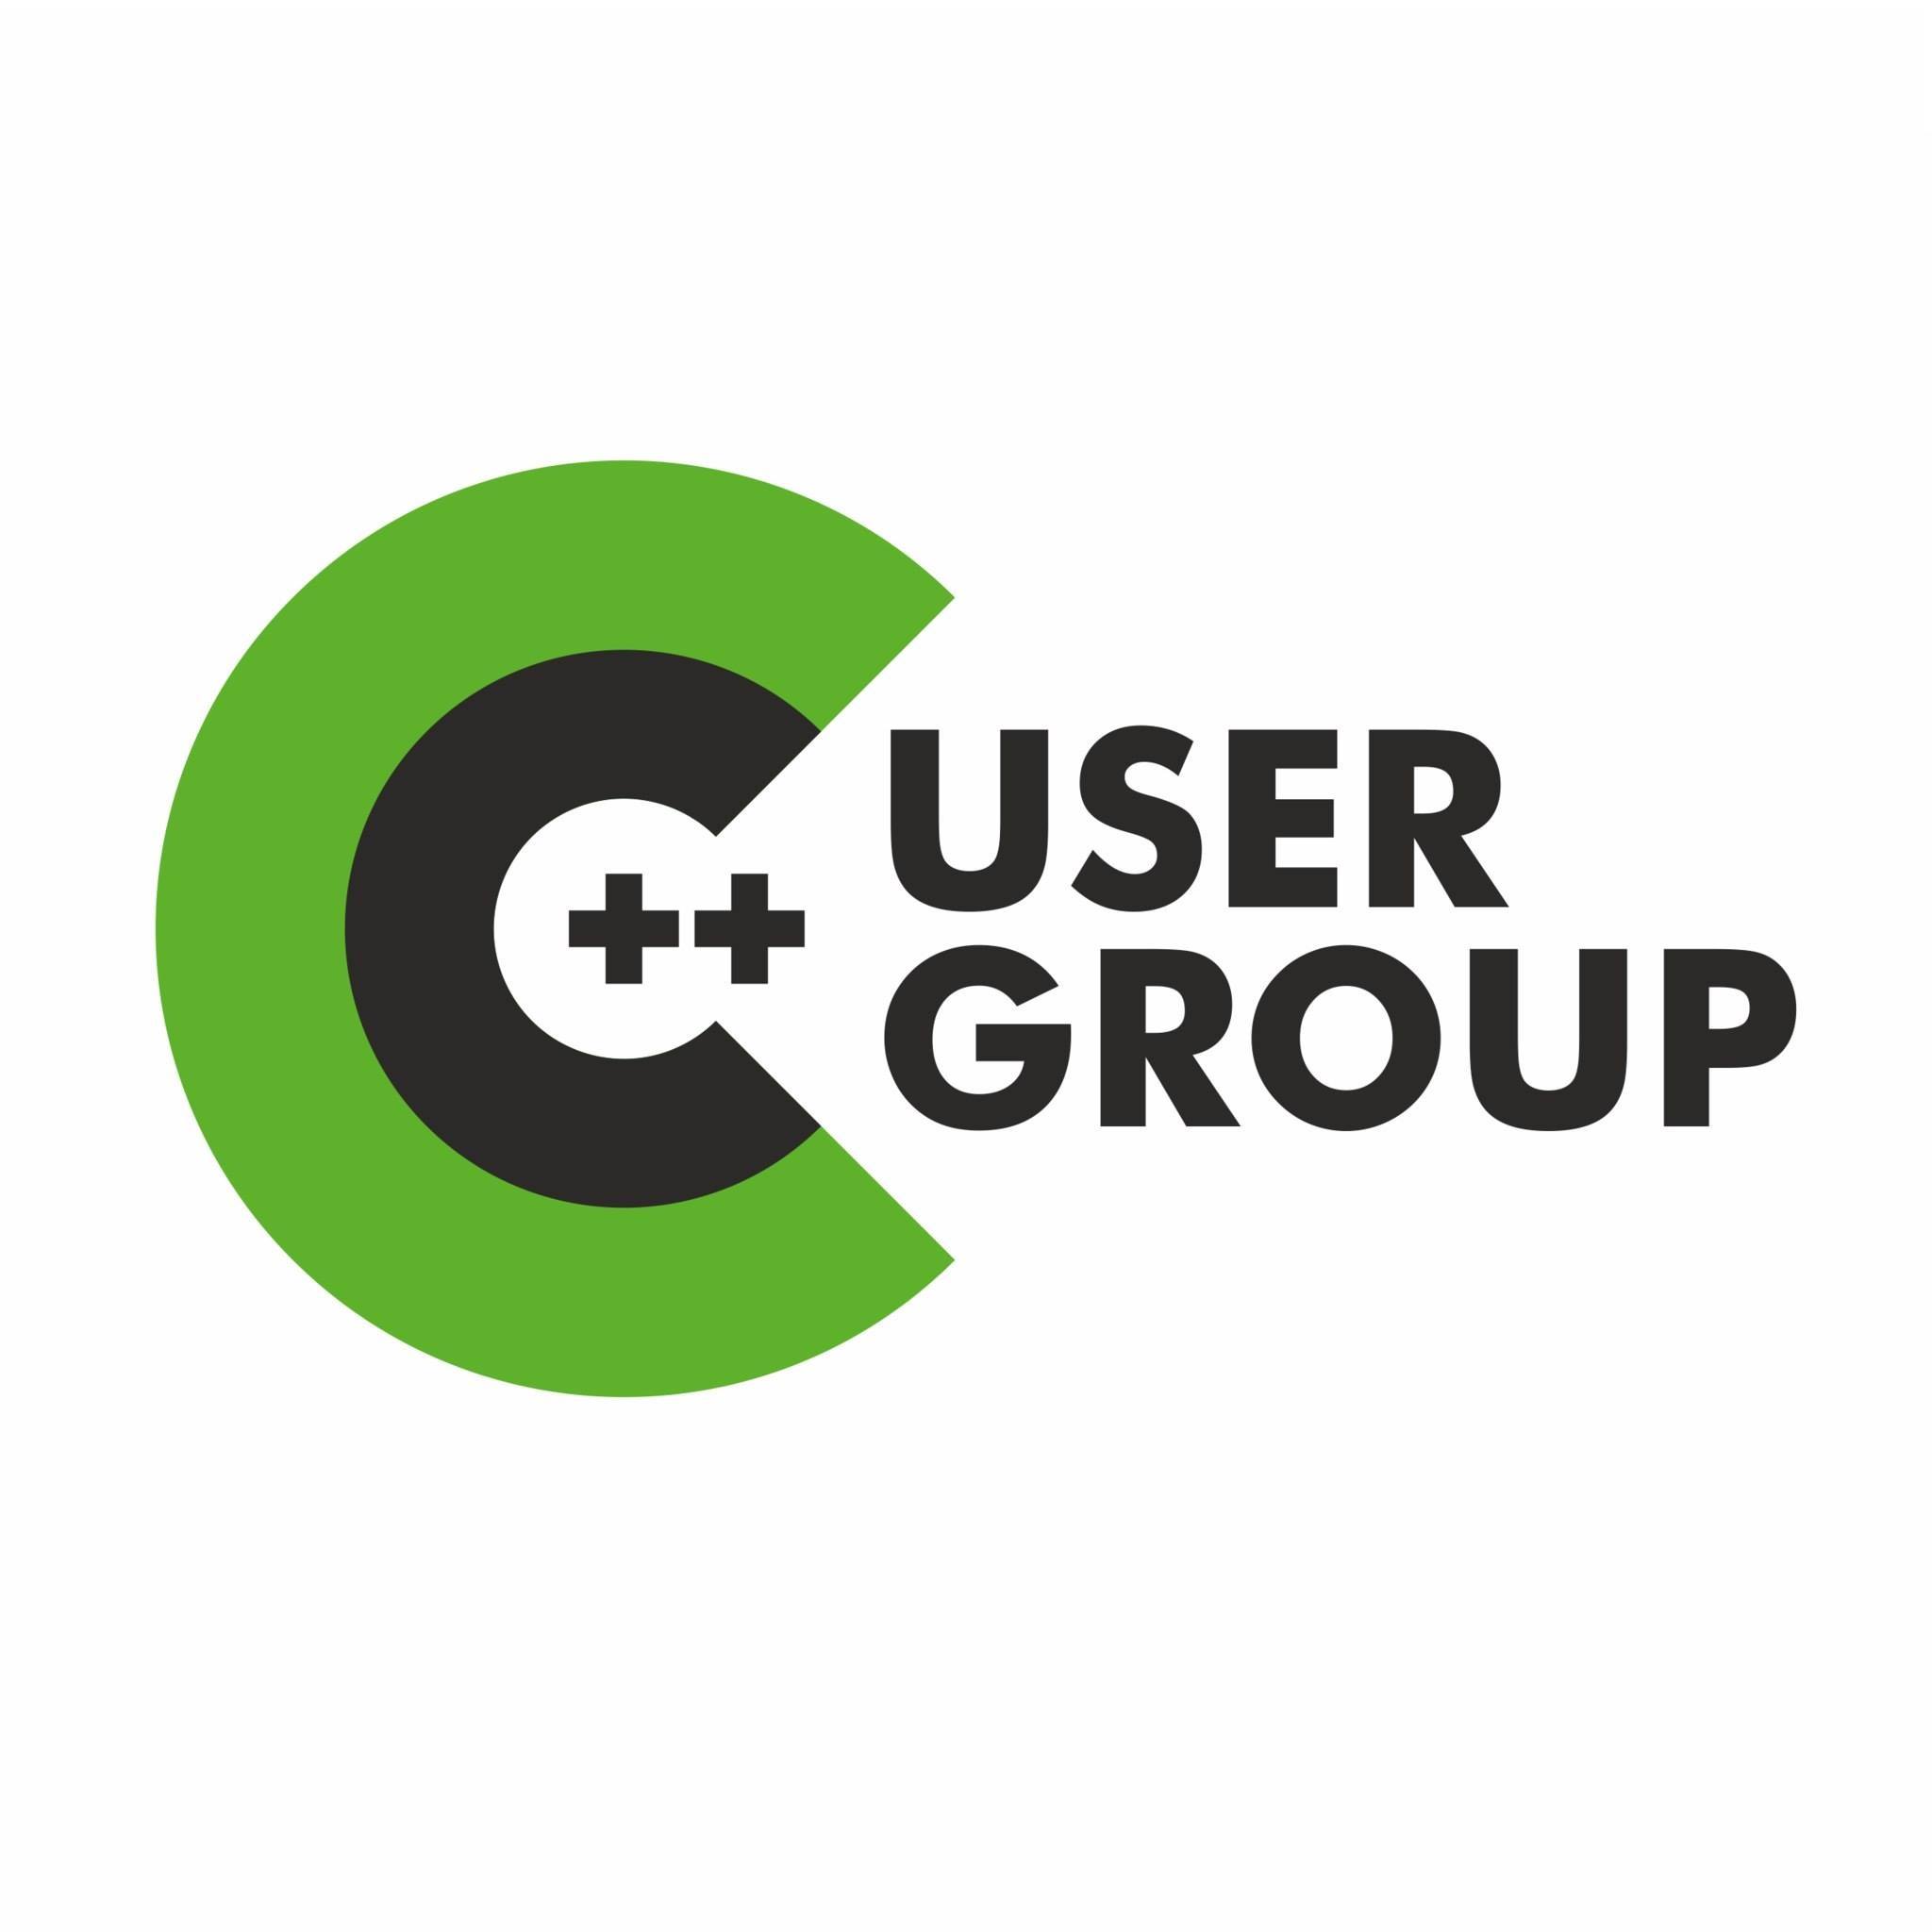 /C++ User Group Moscow